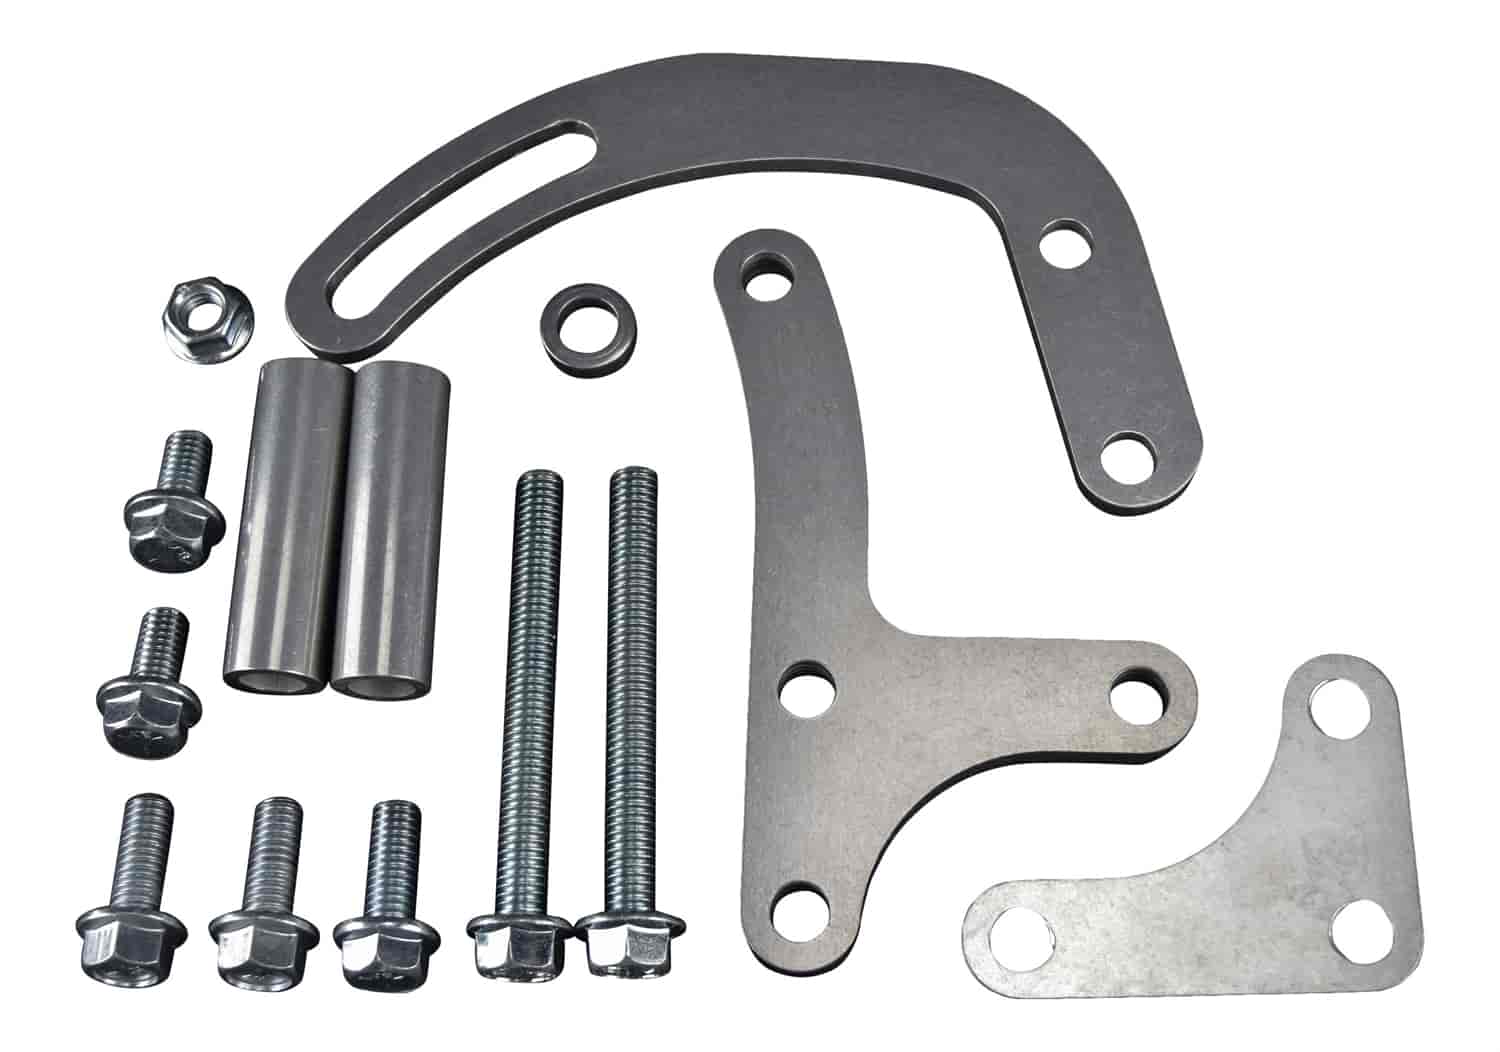 Billet Power Steering Pump Bracket for Small Block Chevy with Electric Water Pump